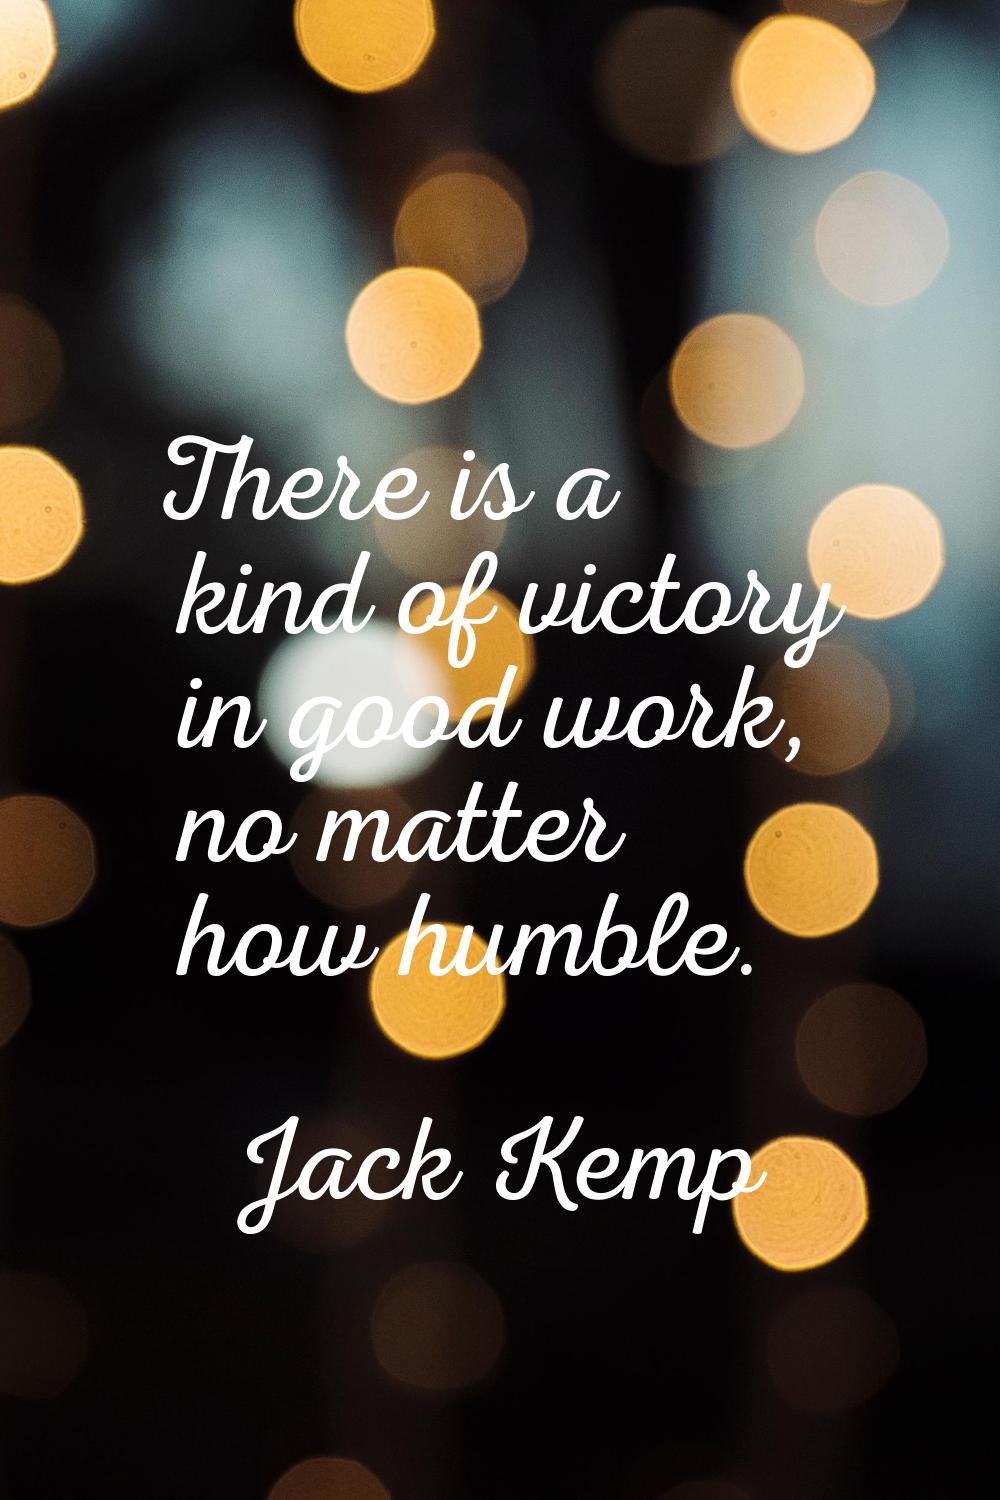 There is a kind of victory in good work, no matter how humble.